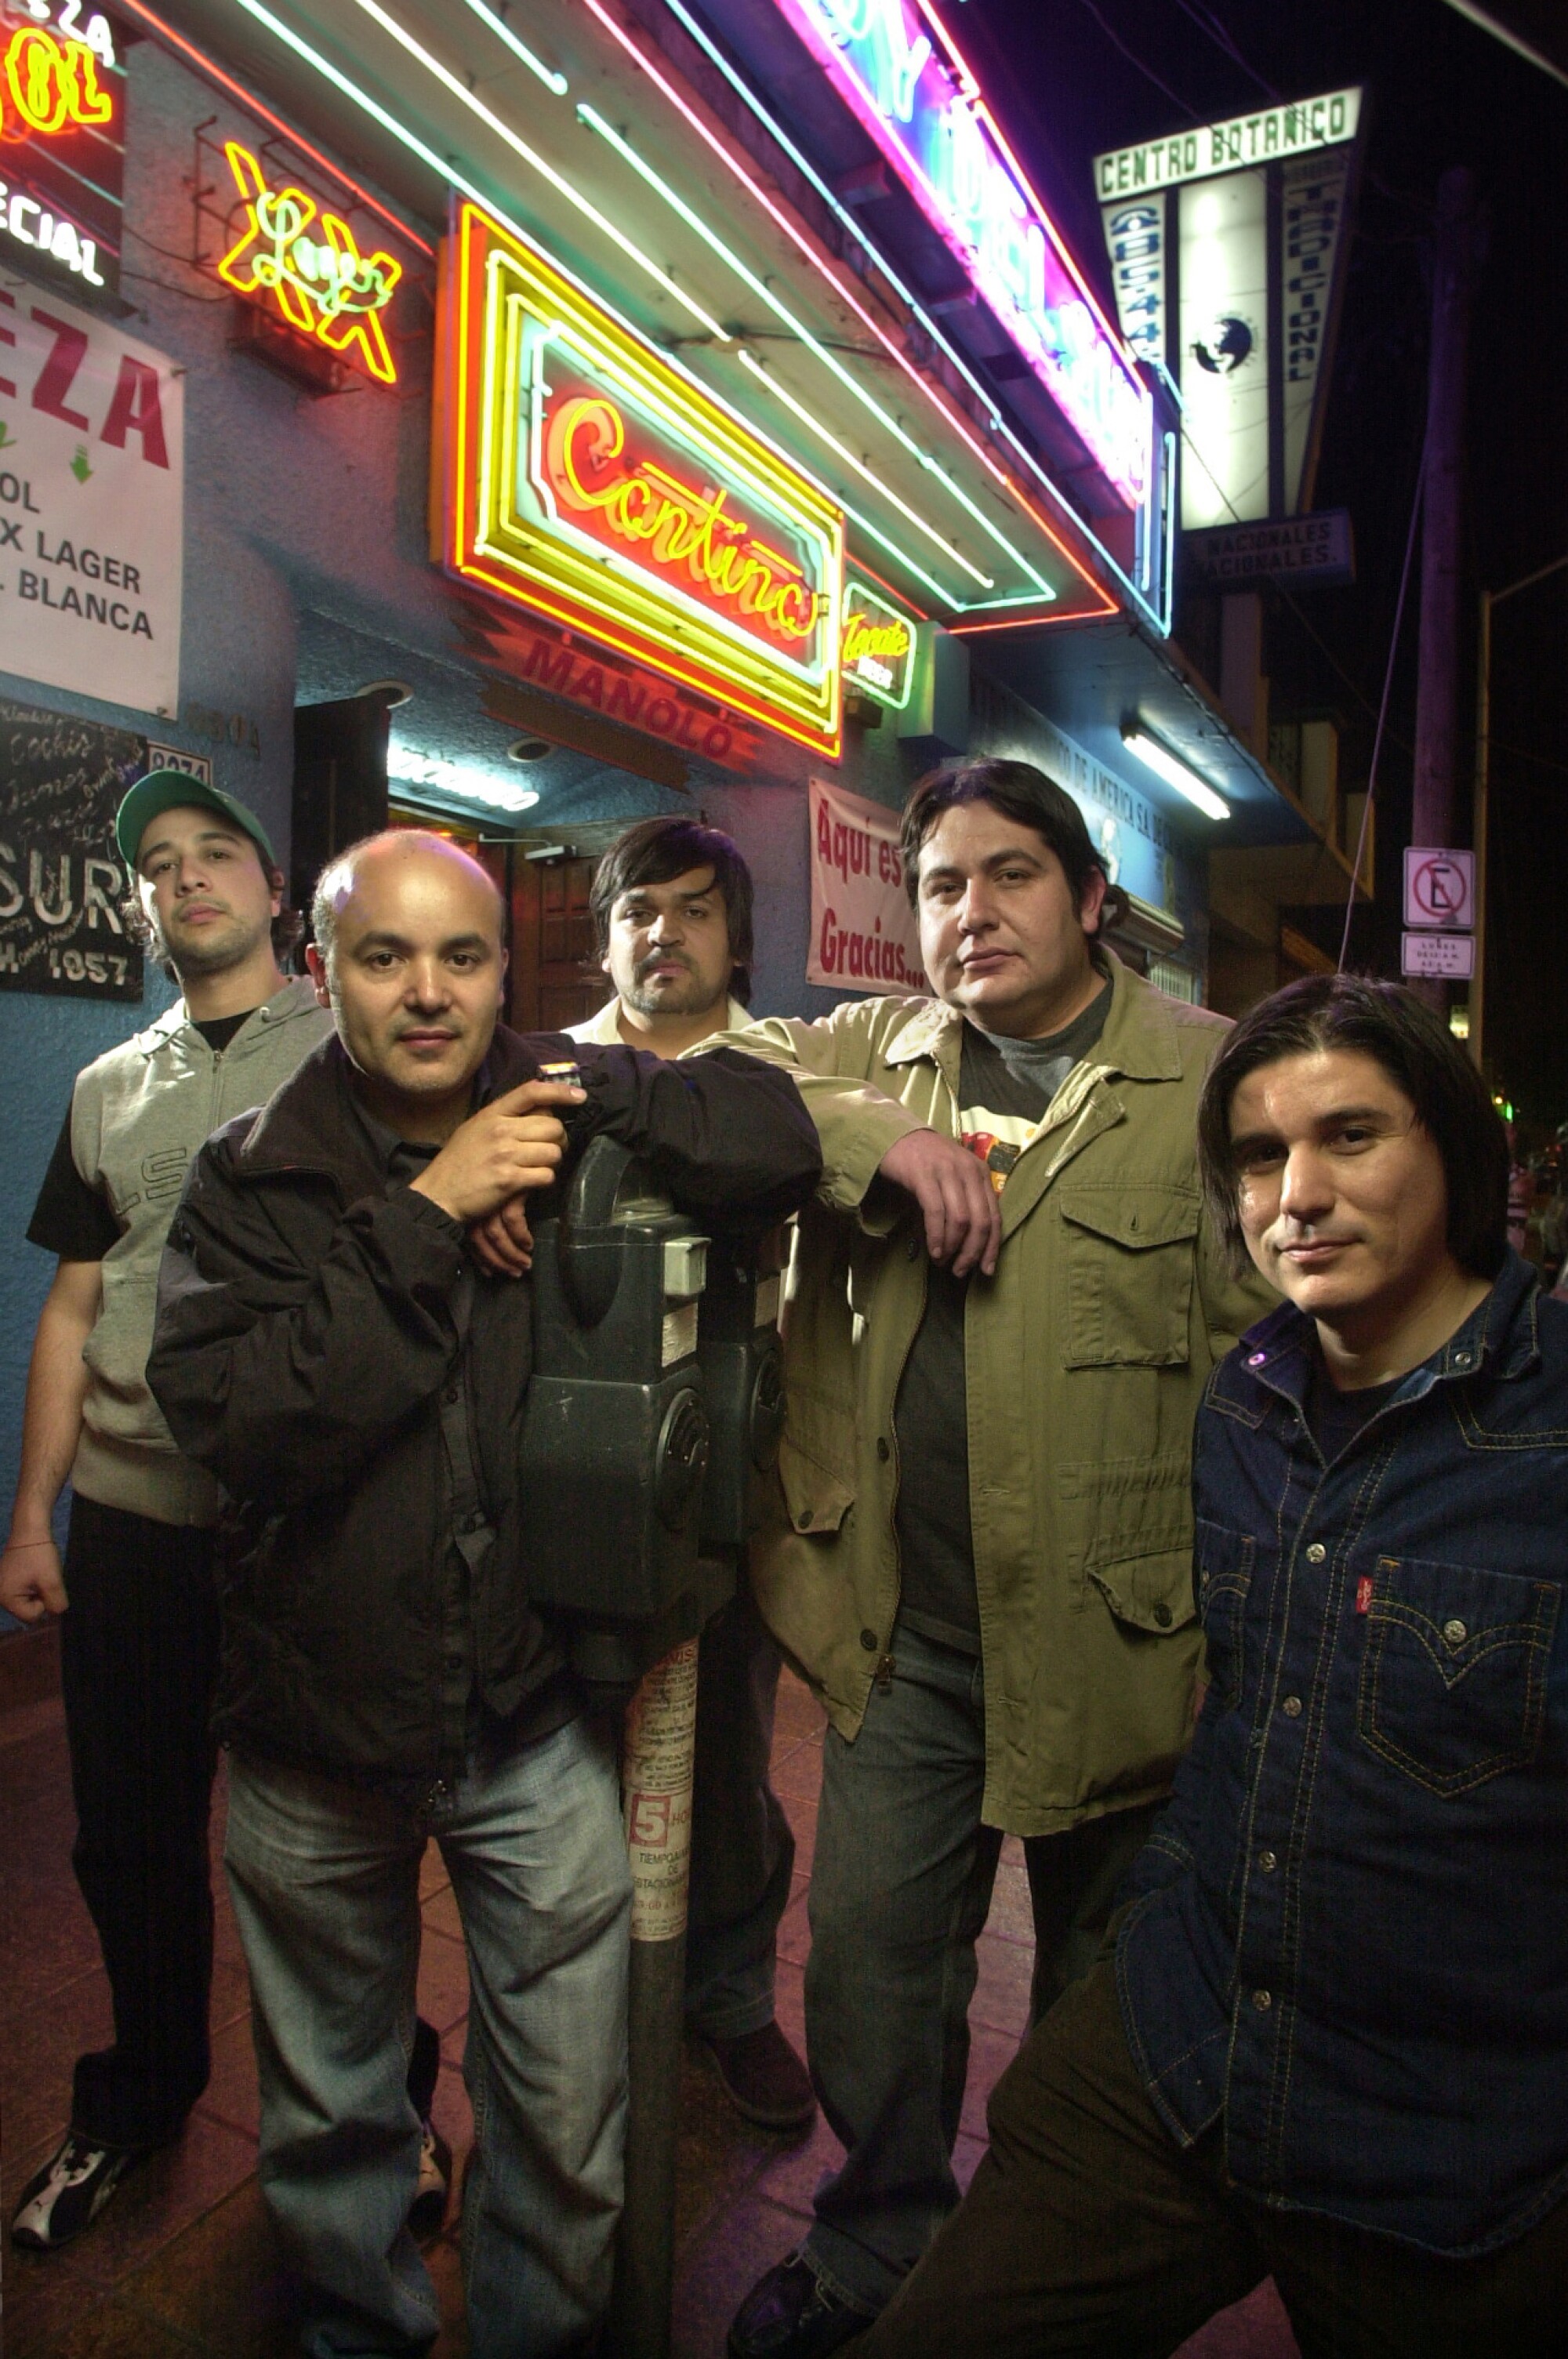 Members of the band Nortec Collective gather in front of Dandy del Sur in Tijuana's Centro district.